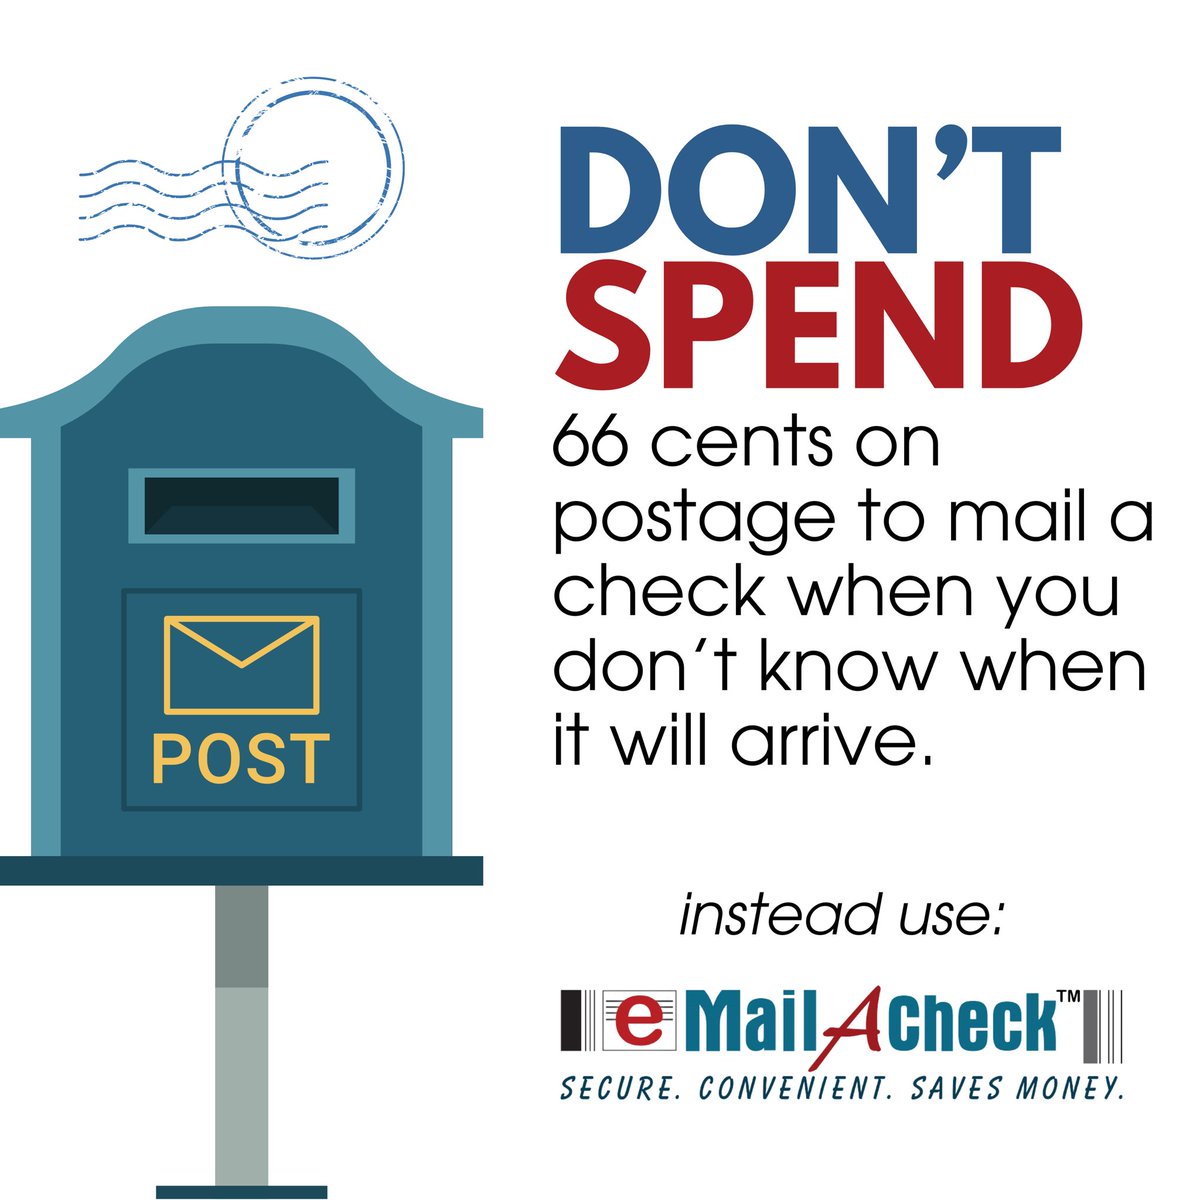 Don’t stress about late fees due to slow delivery times-
Deliver your checks instantly with eMailACheck!

Experience the convenience: emailacheck.com 

#emailacheck #onlinechecks #onlinepayments #makepaymentsonline #SecureMoneyTransfer